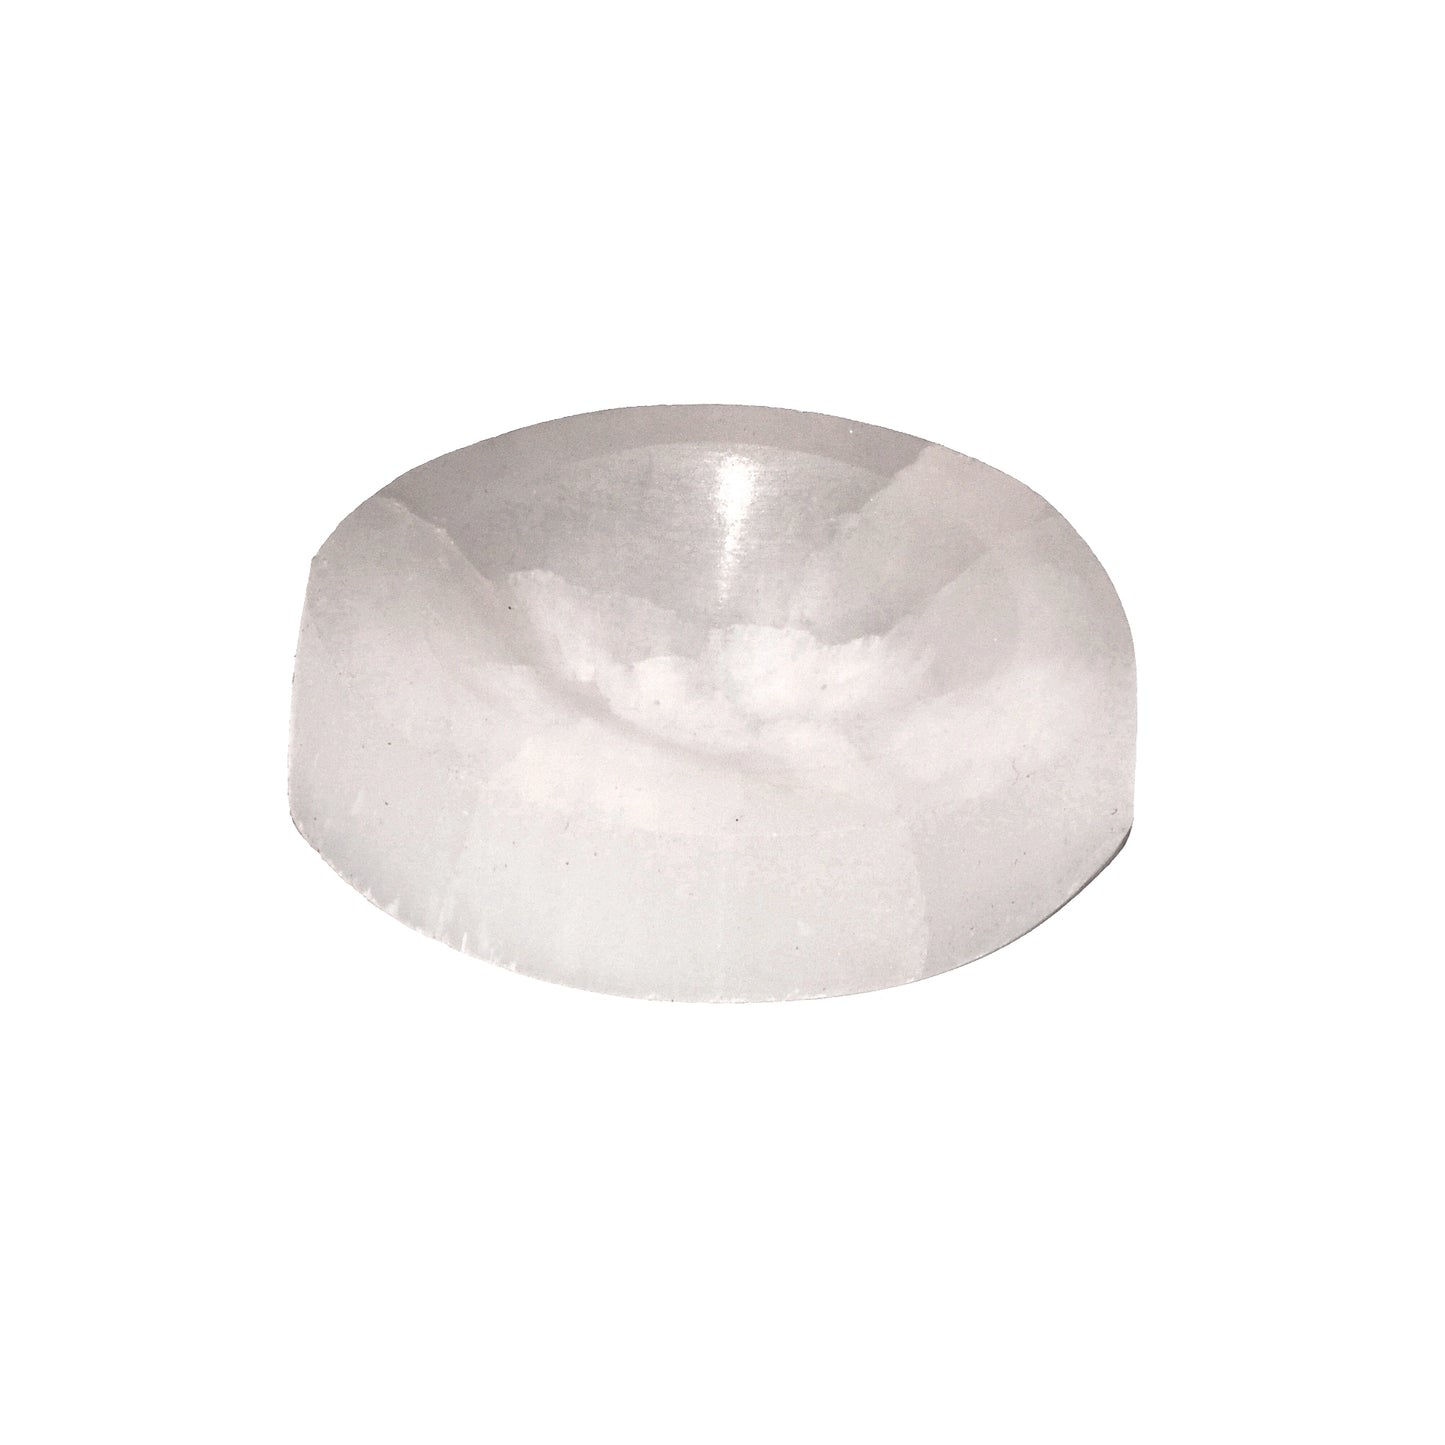 Selenite Worry Stone - Polished Crystal Carving